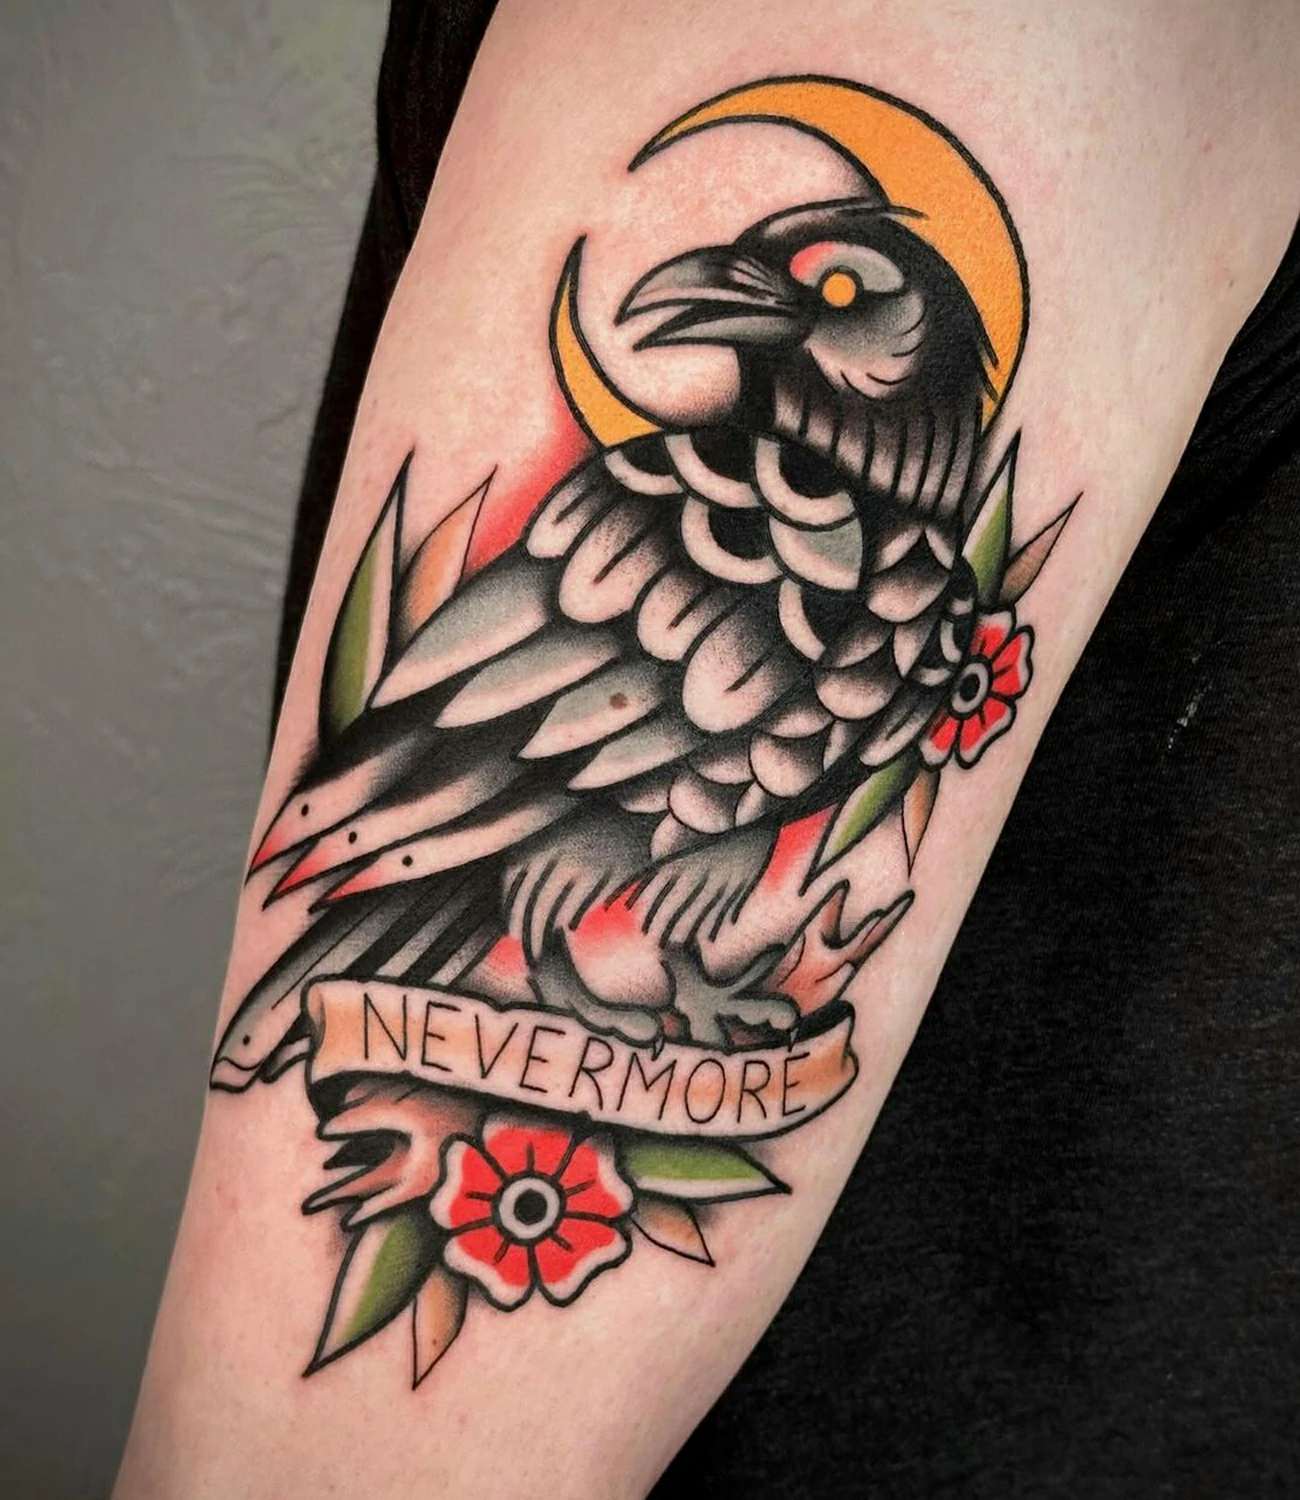 Trad raven tattoo: A raven tattoo done in a traditional style with bold lines and colors.